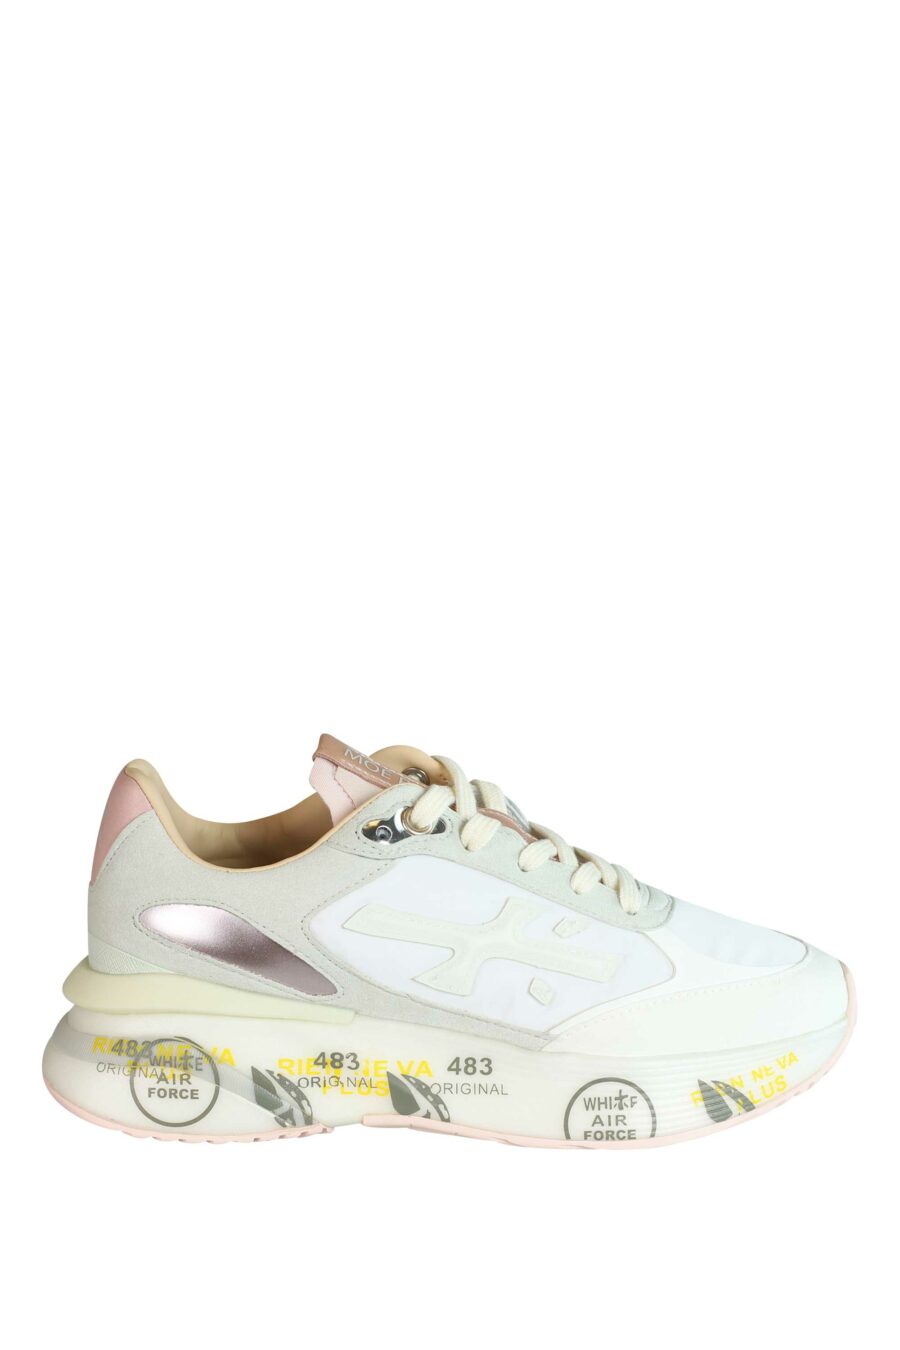 White trainers with pink and grey "moe run-d 6338" - 8058326253473